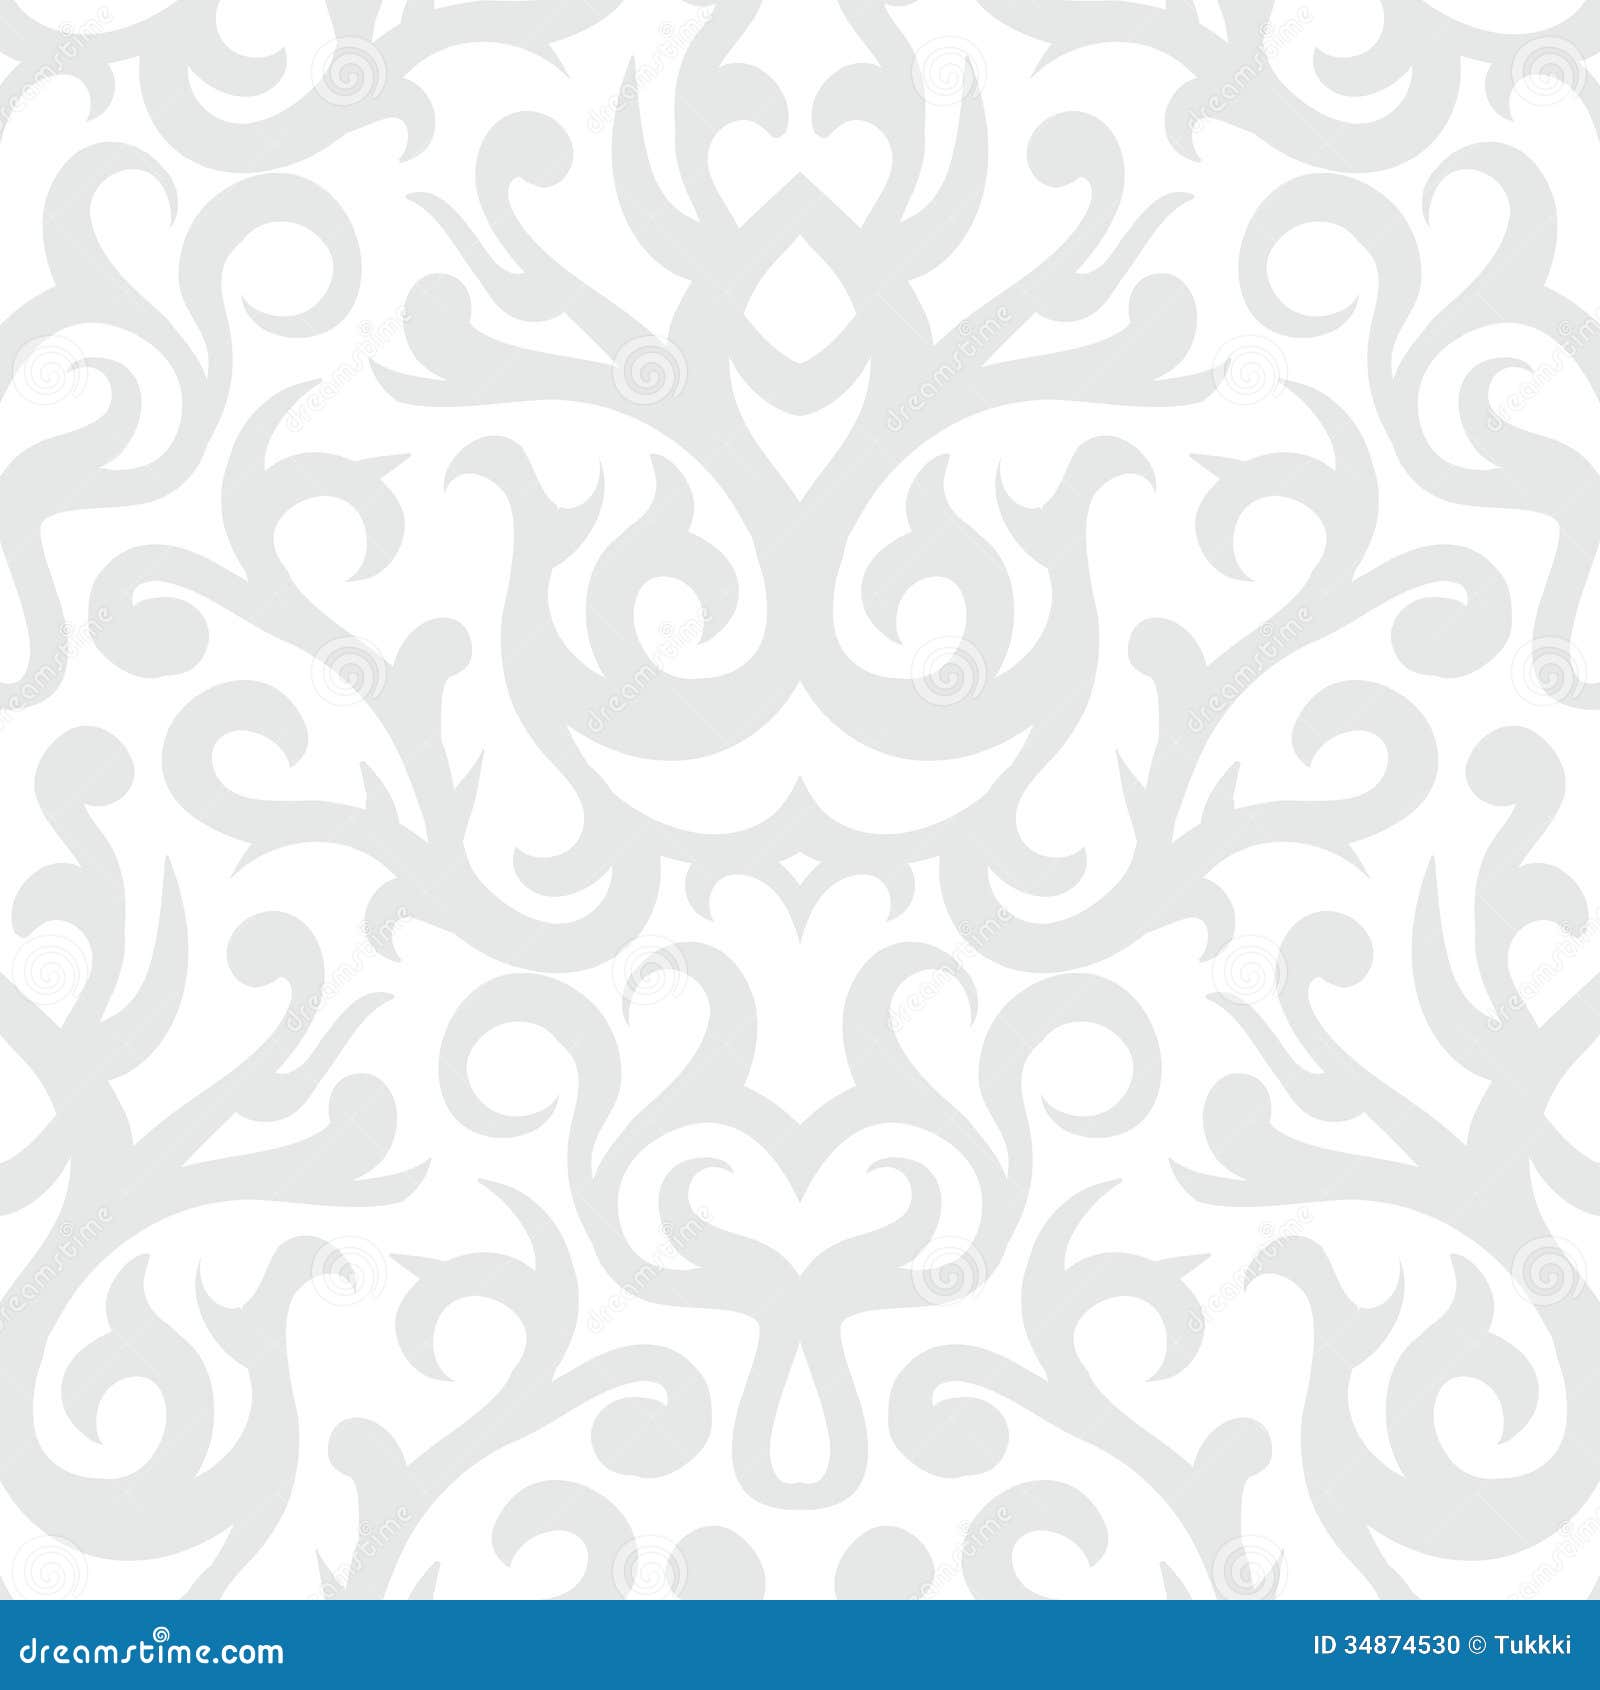 Damask Pattern In White And Silver Stock Photo - Image: 34874530